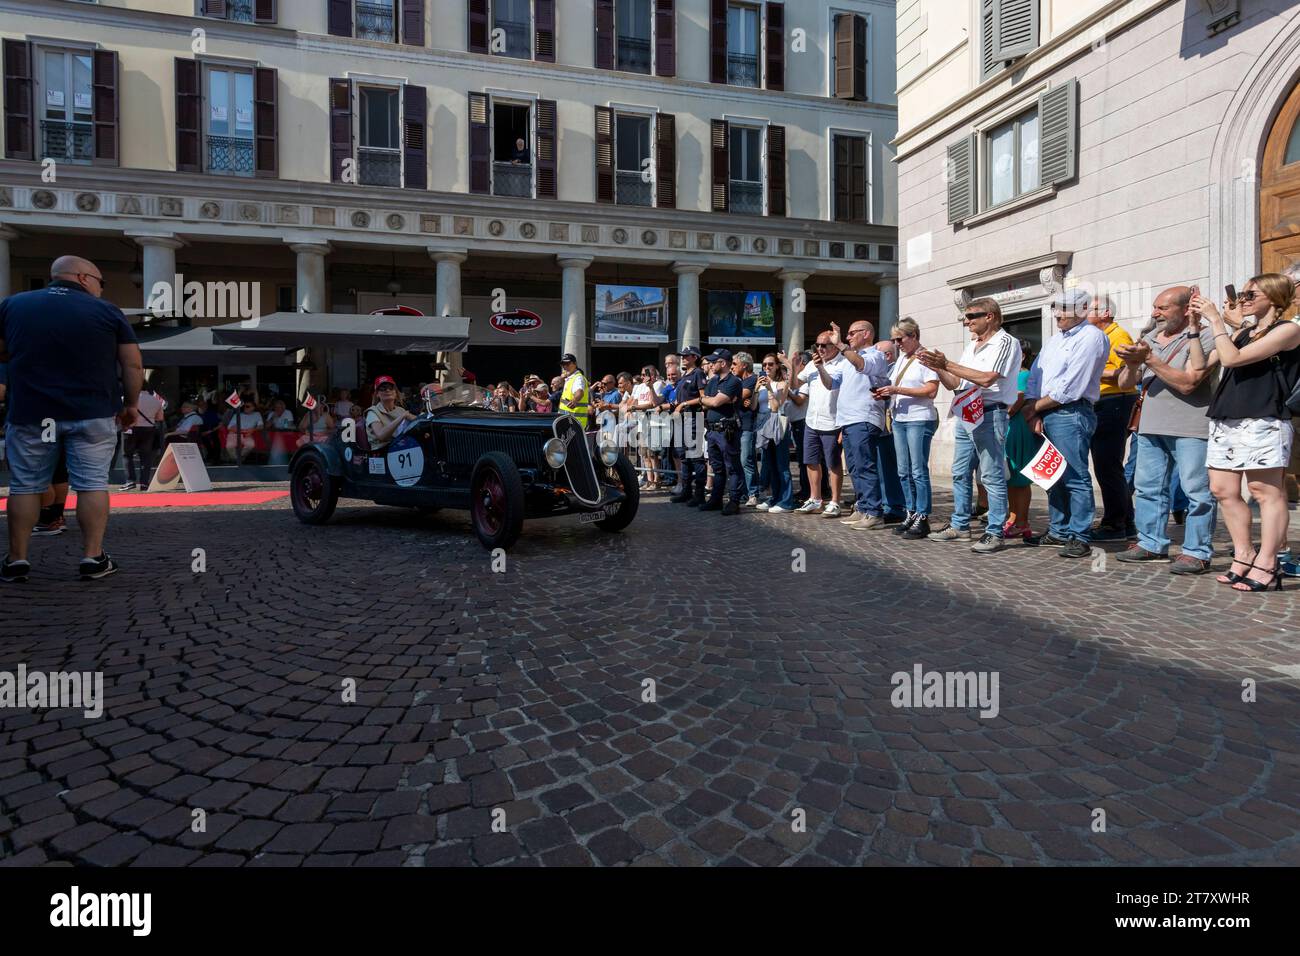 1000 Miglia, parade of historic cars between two wings of the crowd, Novara, Piedmont, Italy, Europe Stock Photo